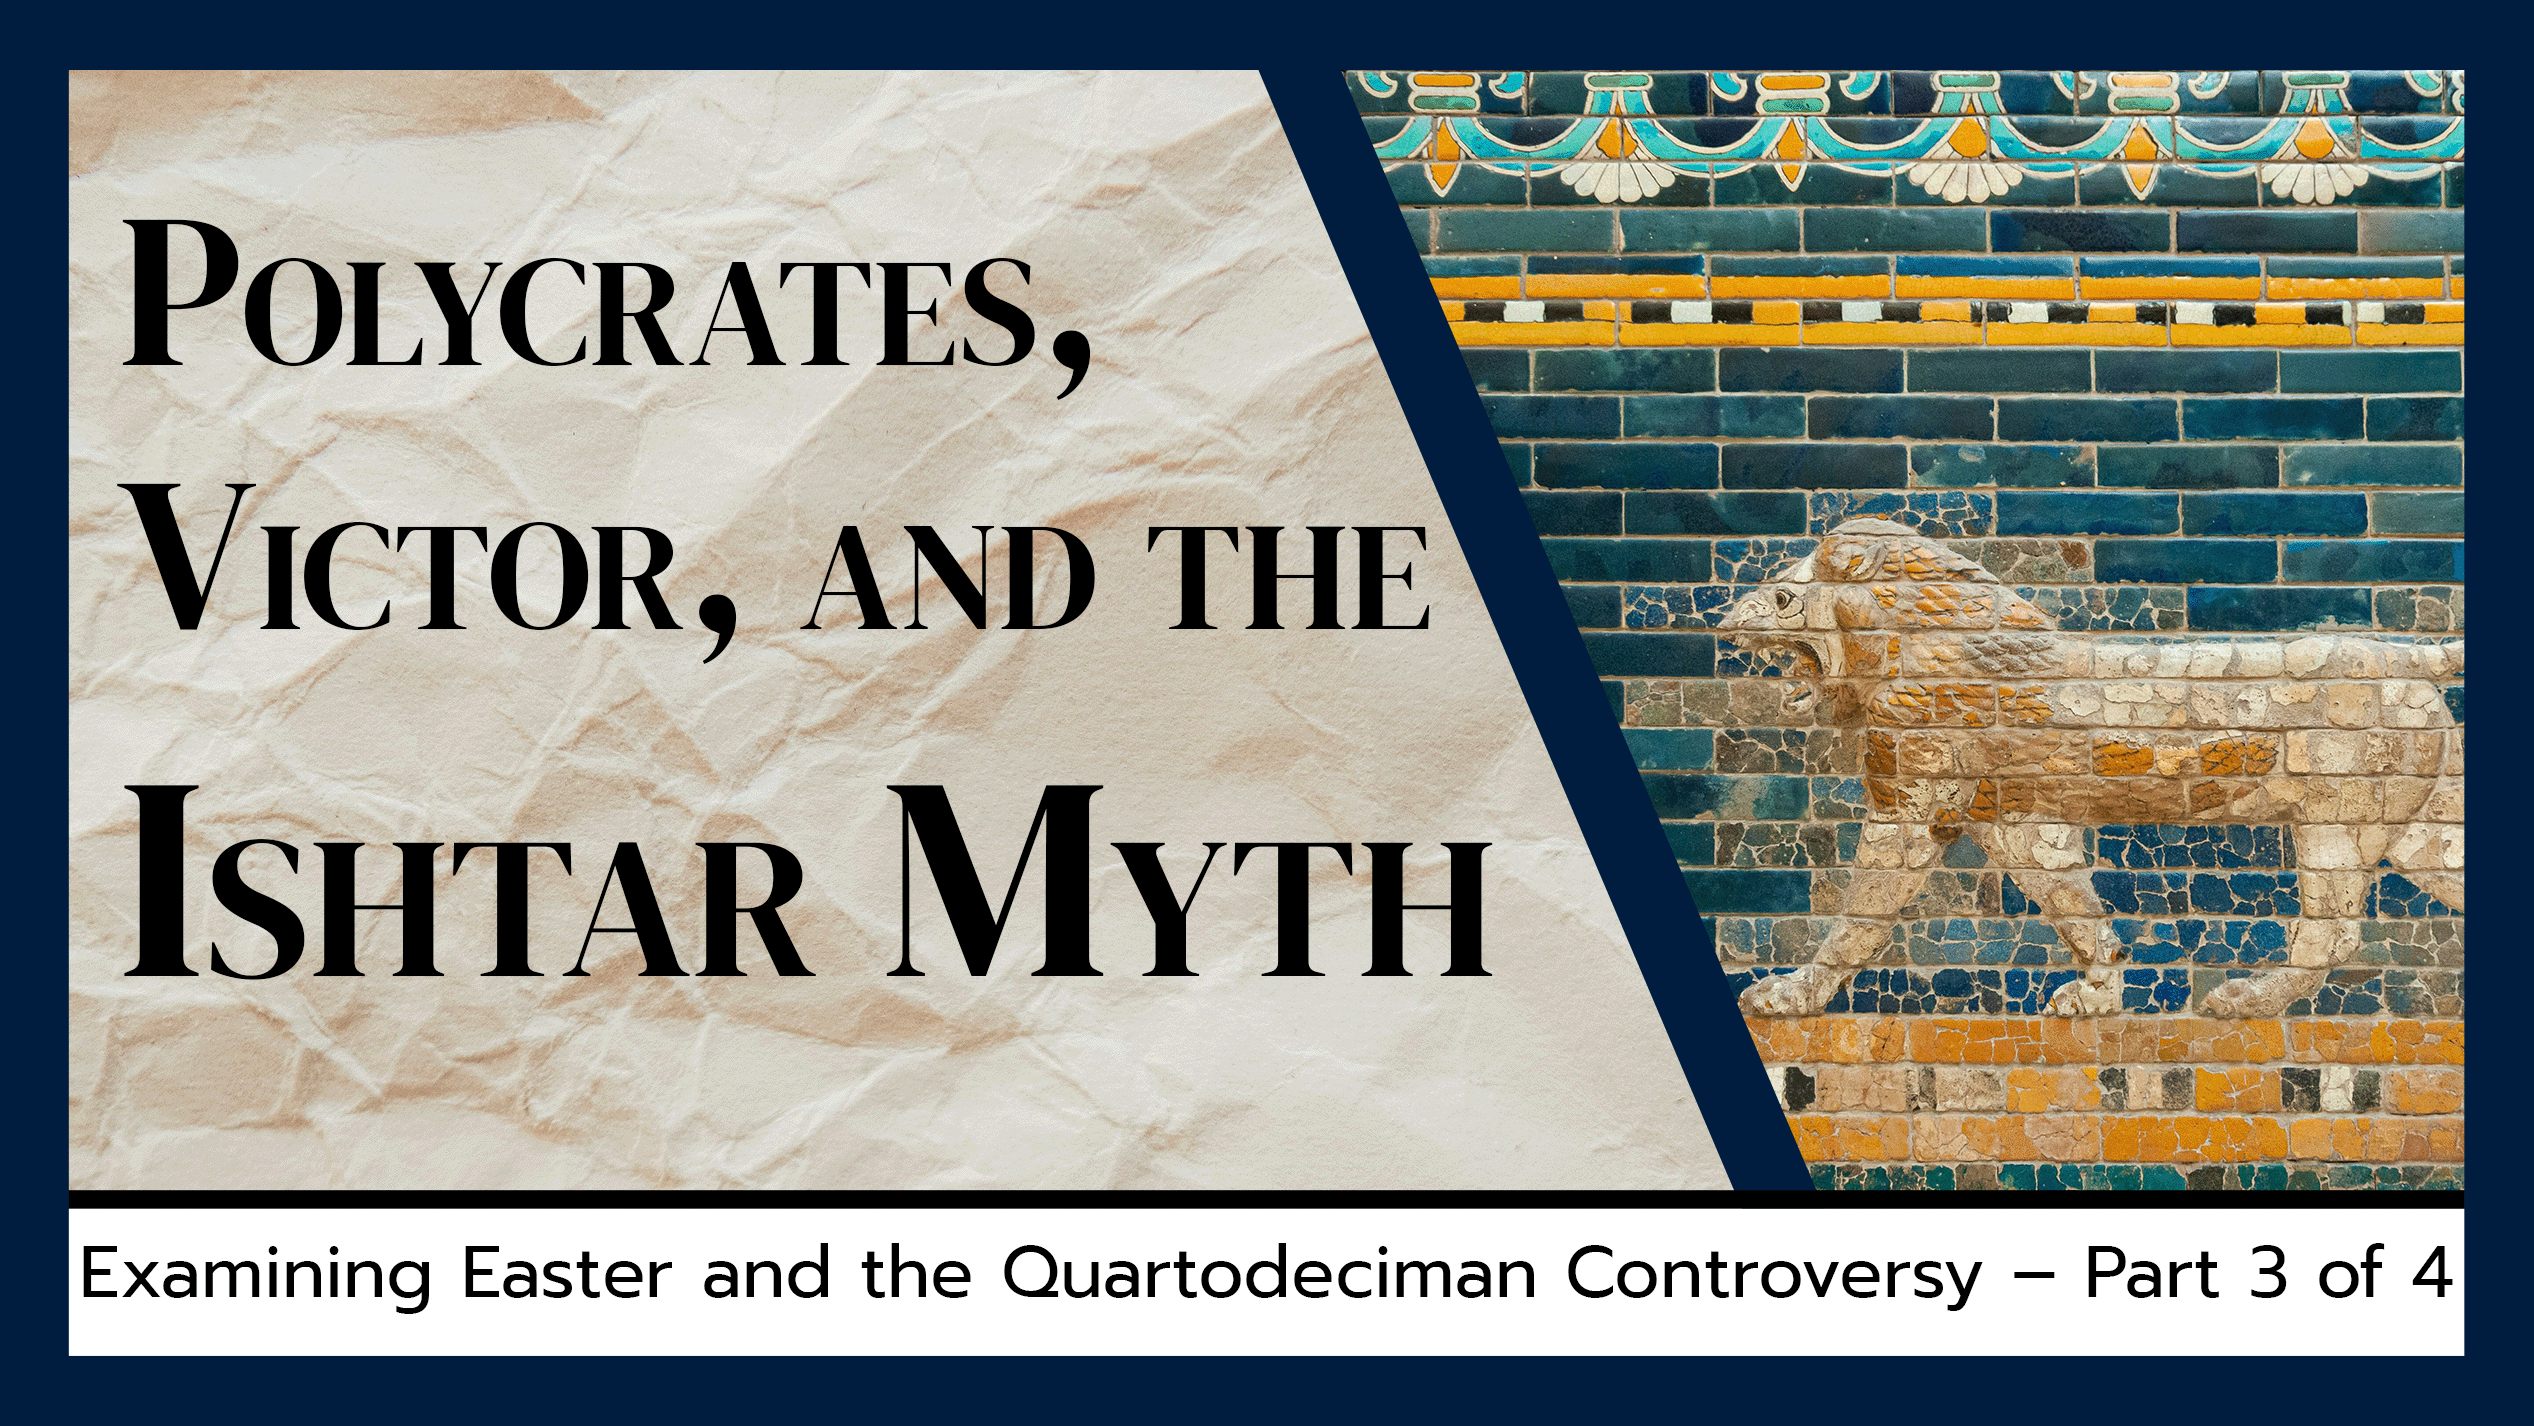 Polycrates, Victor, and the Ishtar Myth (Part 3 of 4)